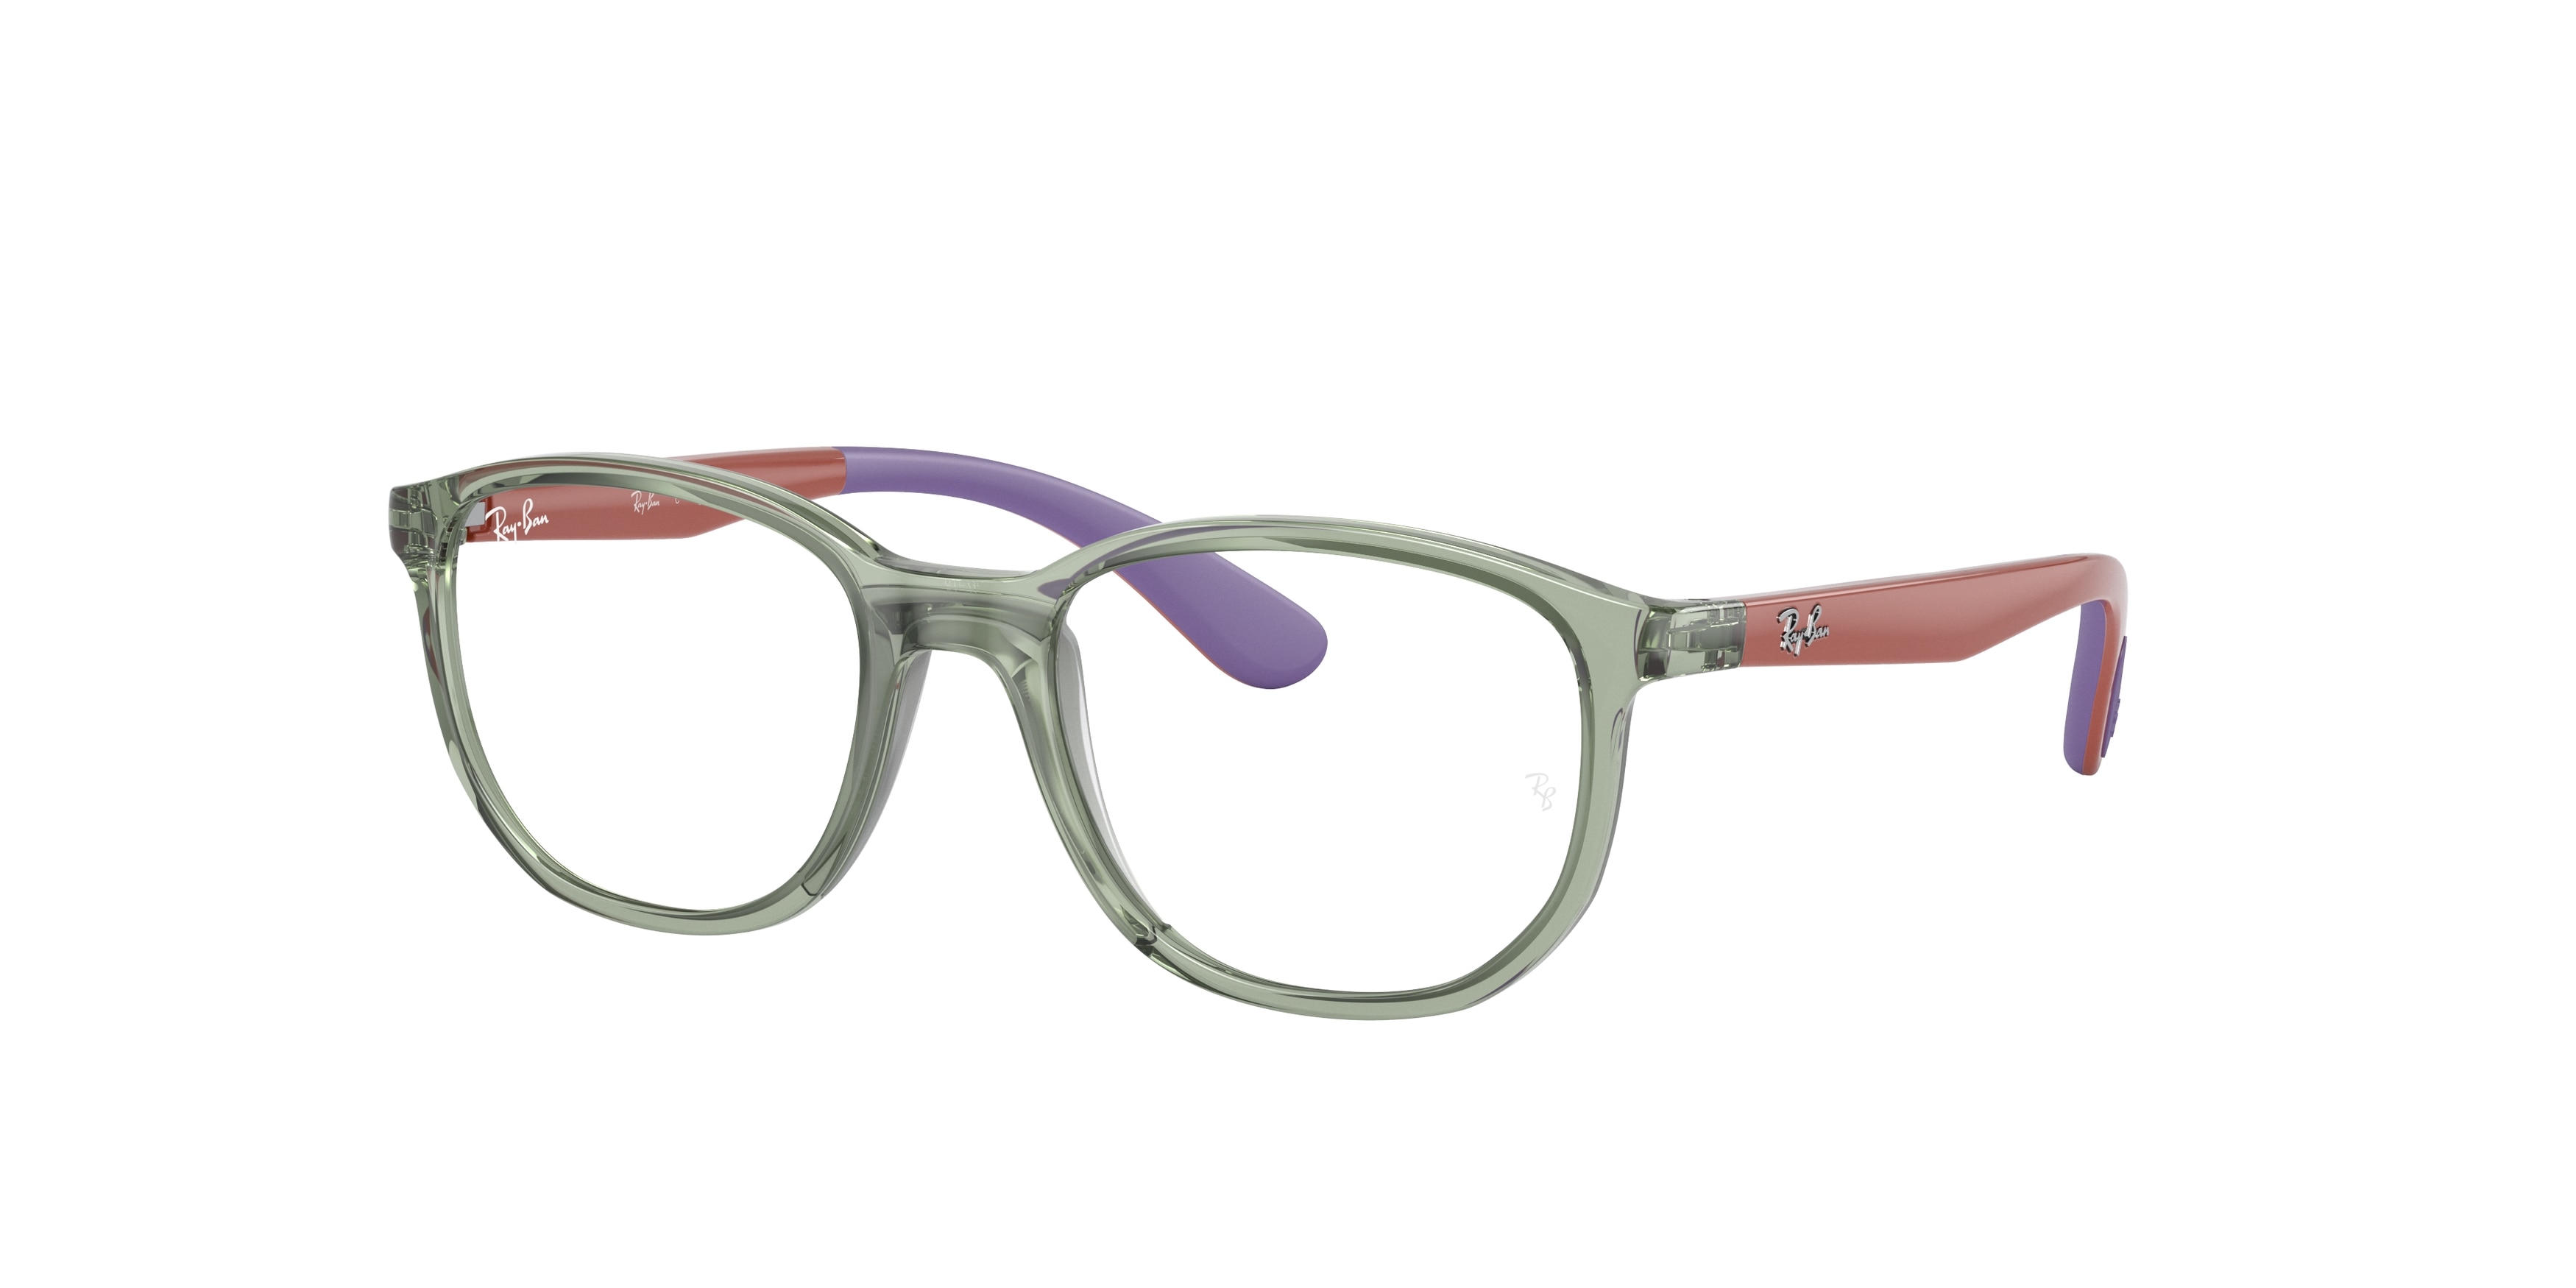 rayban_junior_0ry1619_3922_transparent_green_on_rubber_wisteria_ref